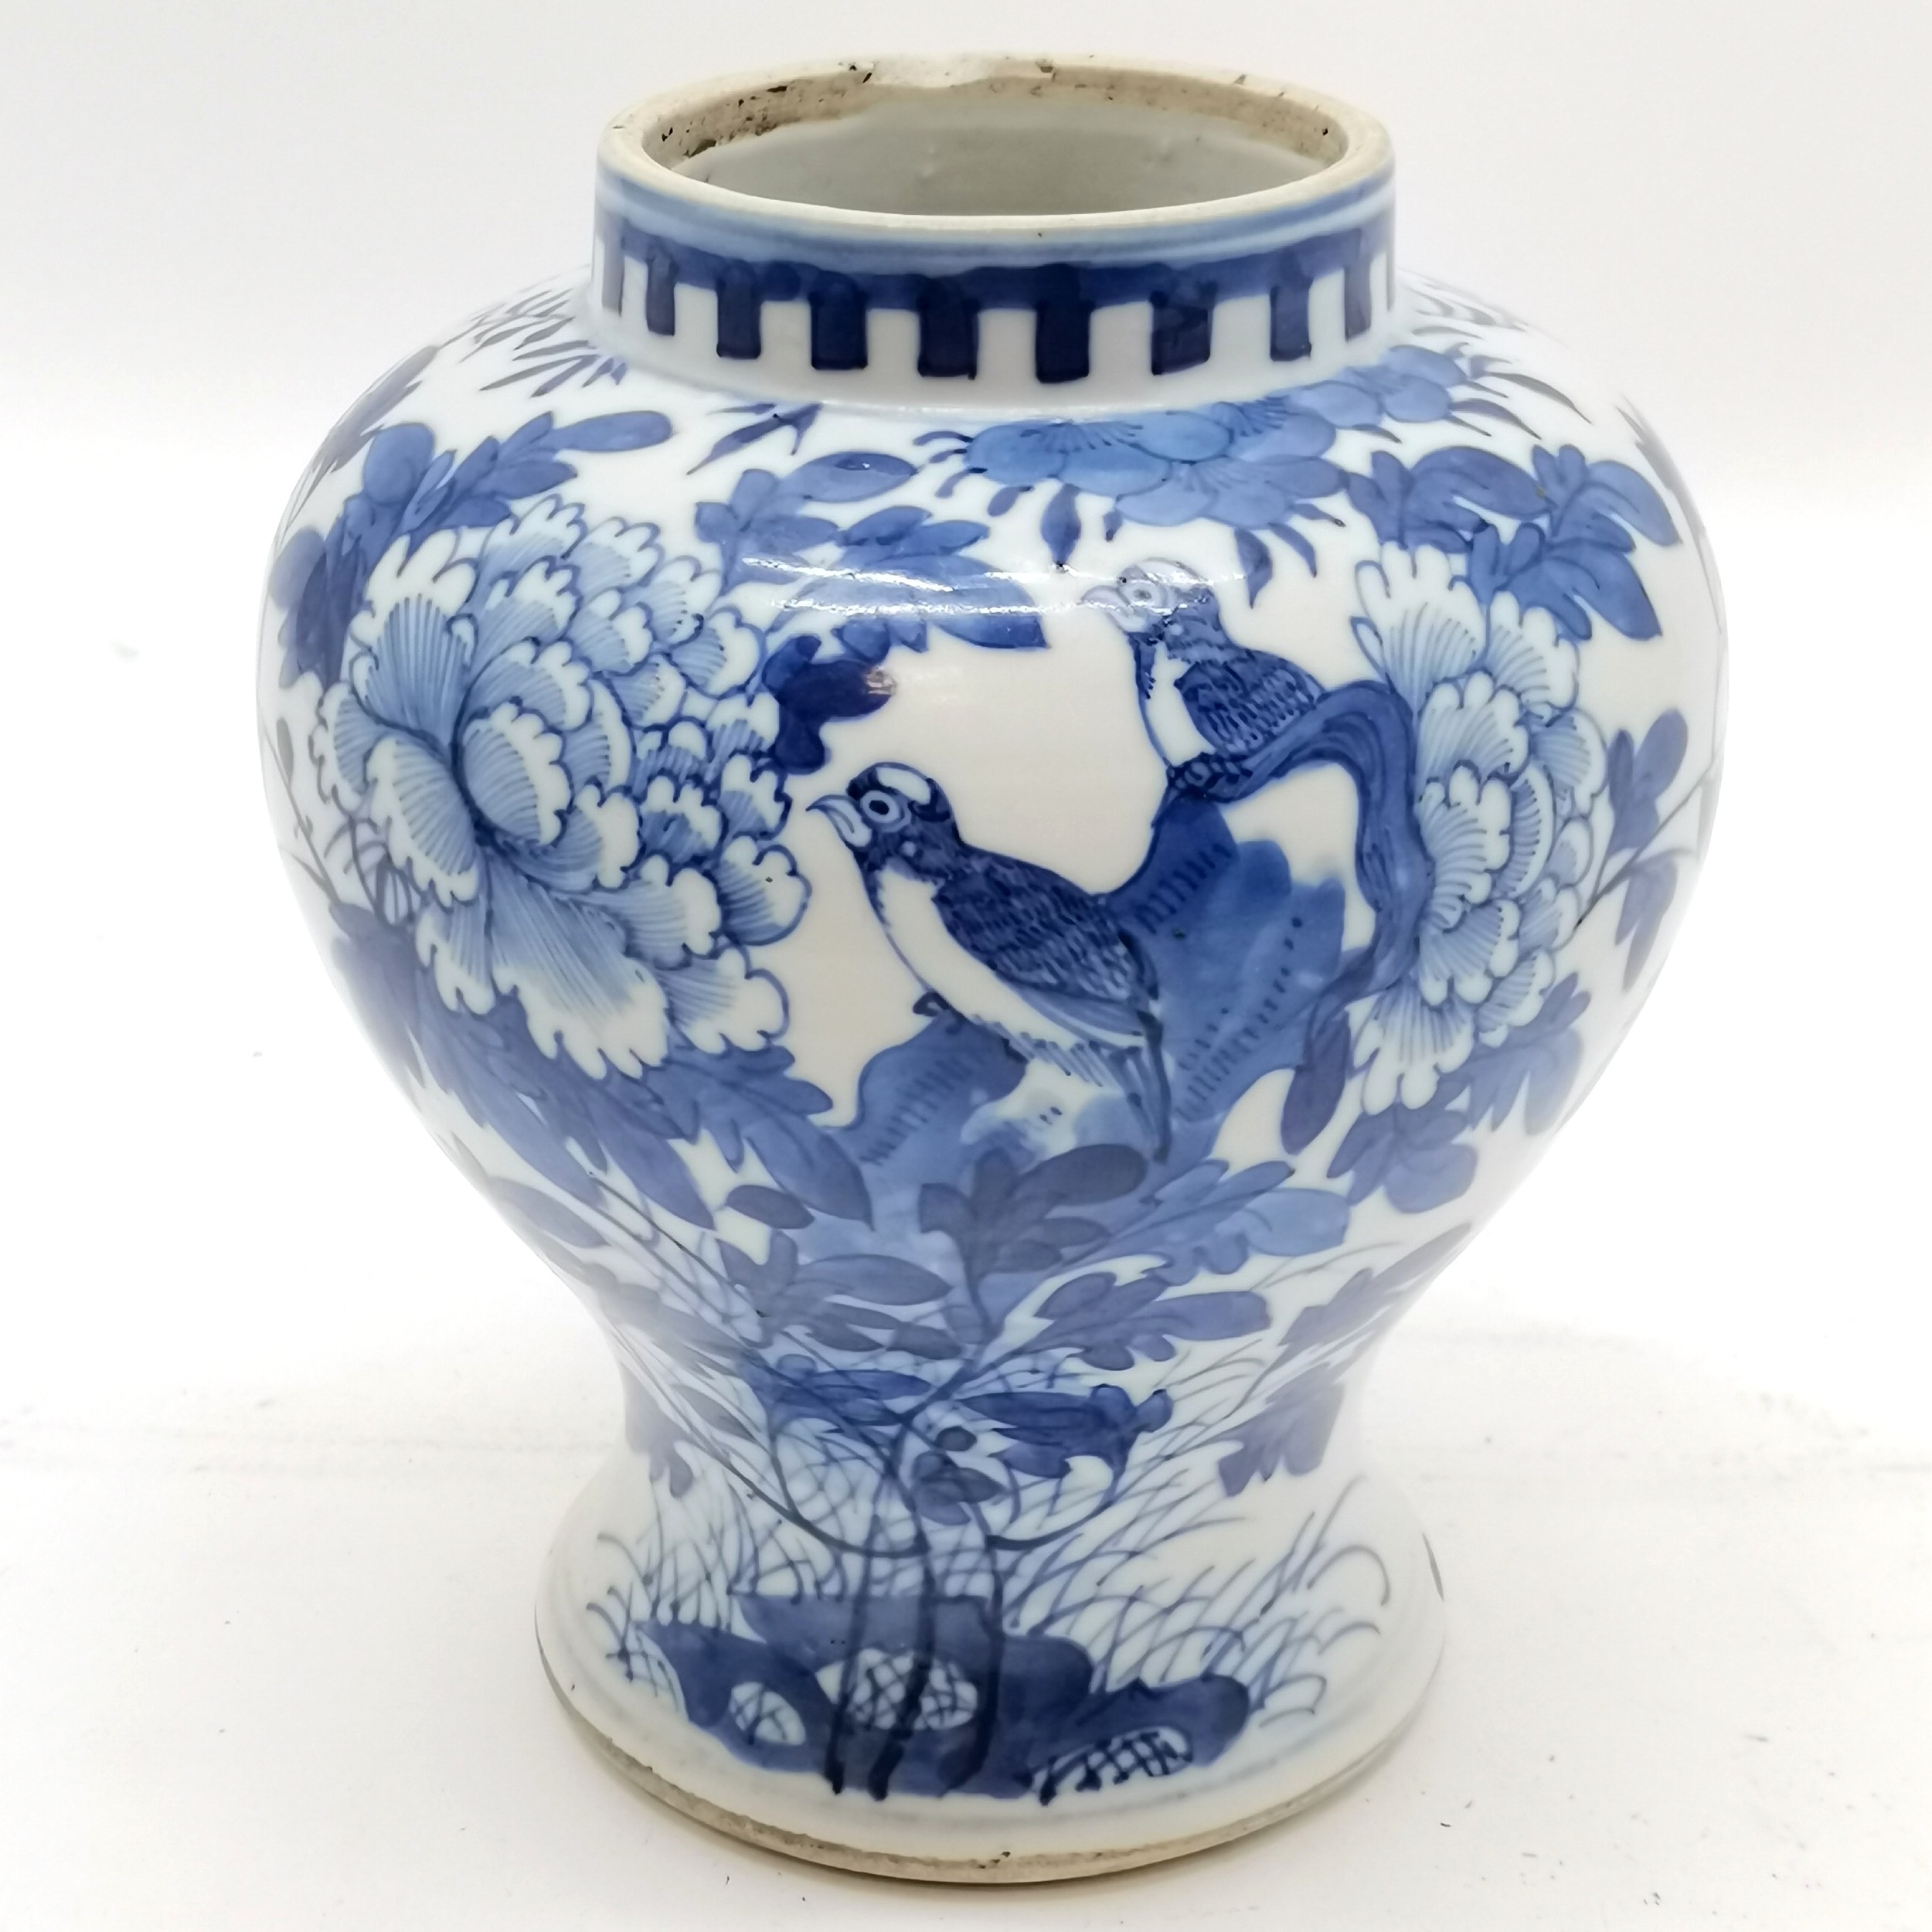 Antique Chinese blue & white decorated pot with bird / flower detail (16cm high) - has chip to rim & - Image 2 of 6